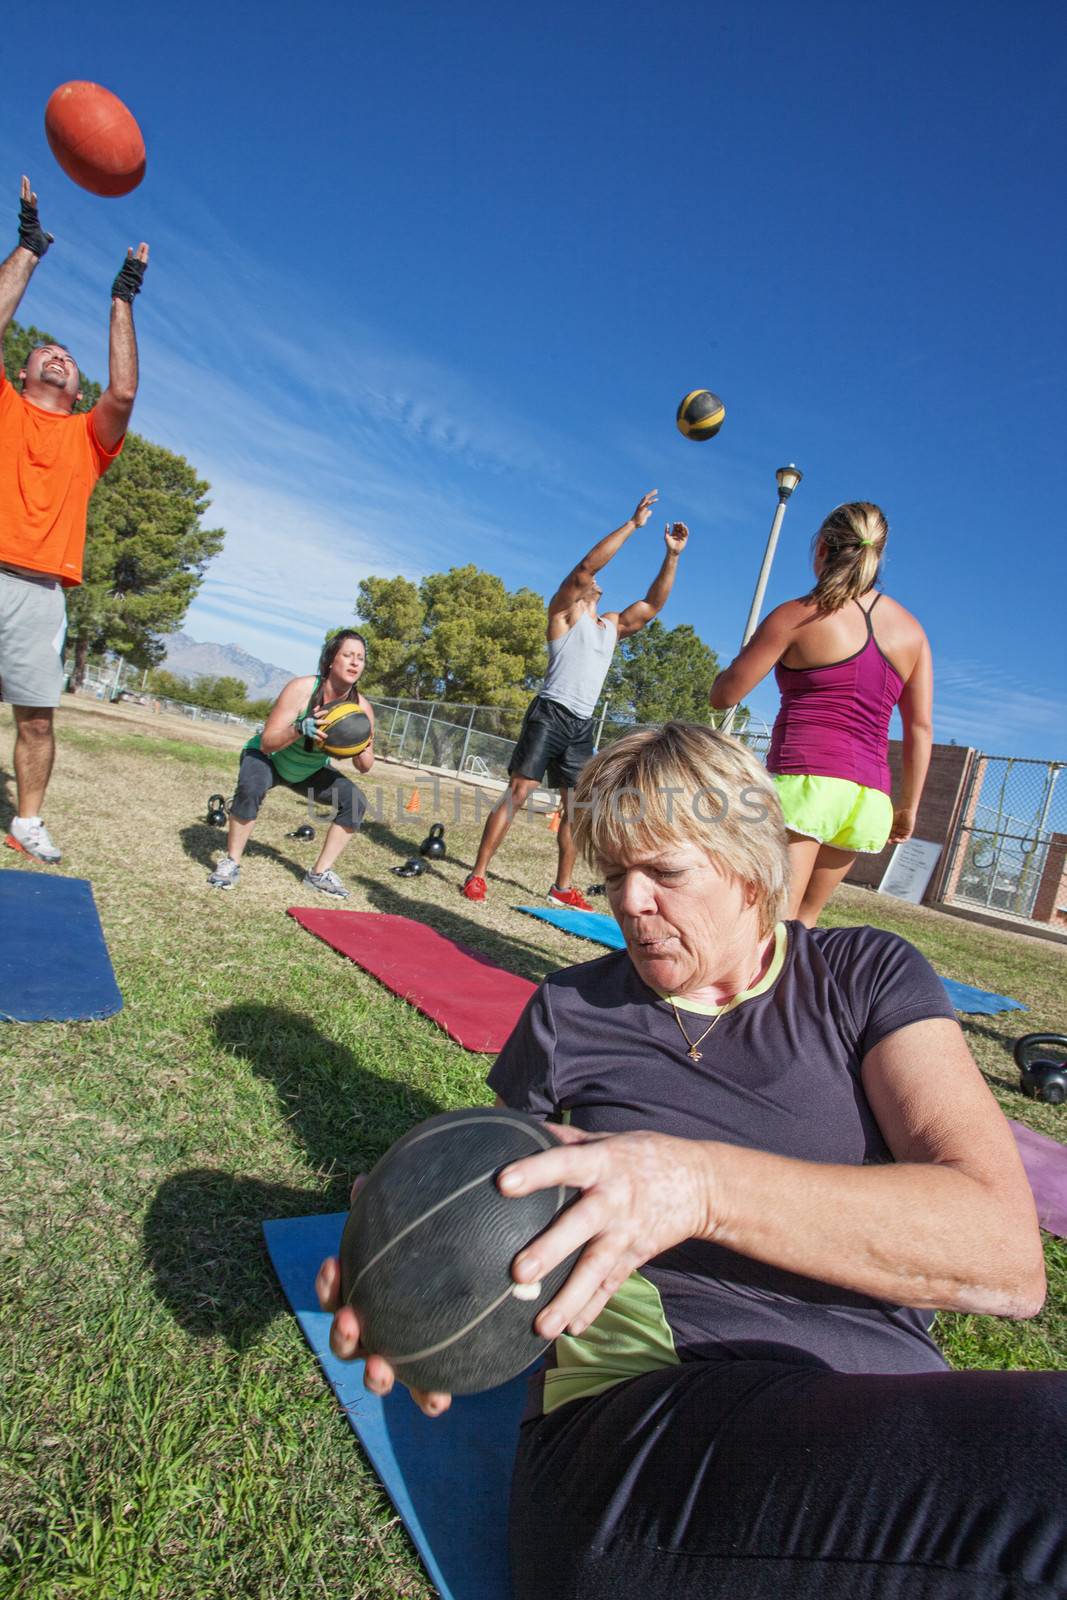 Diverse boot camp fitness class exercising outdoors